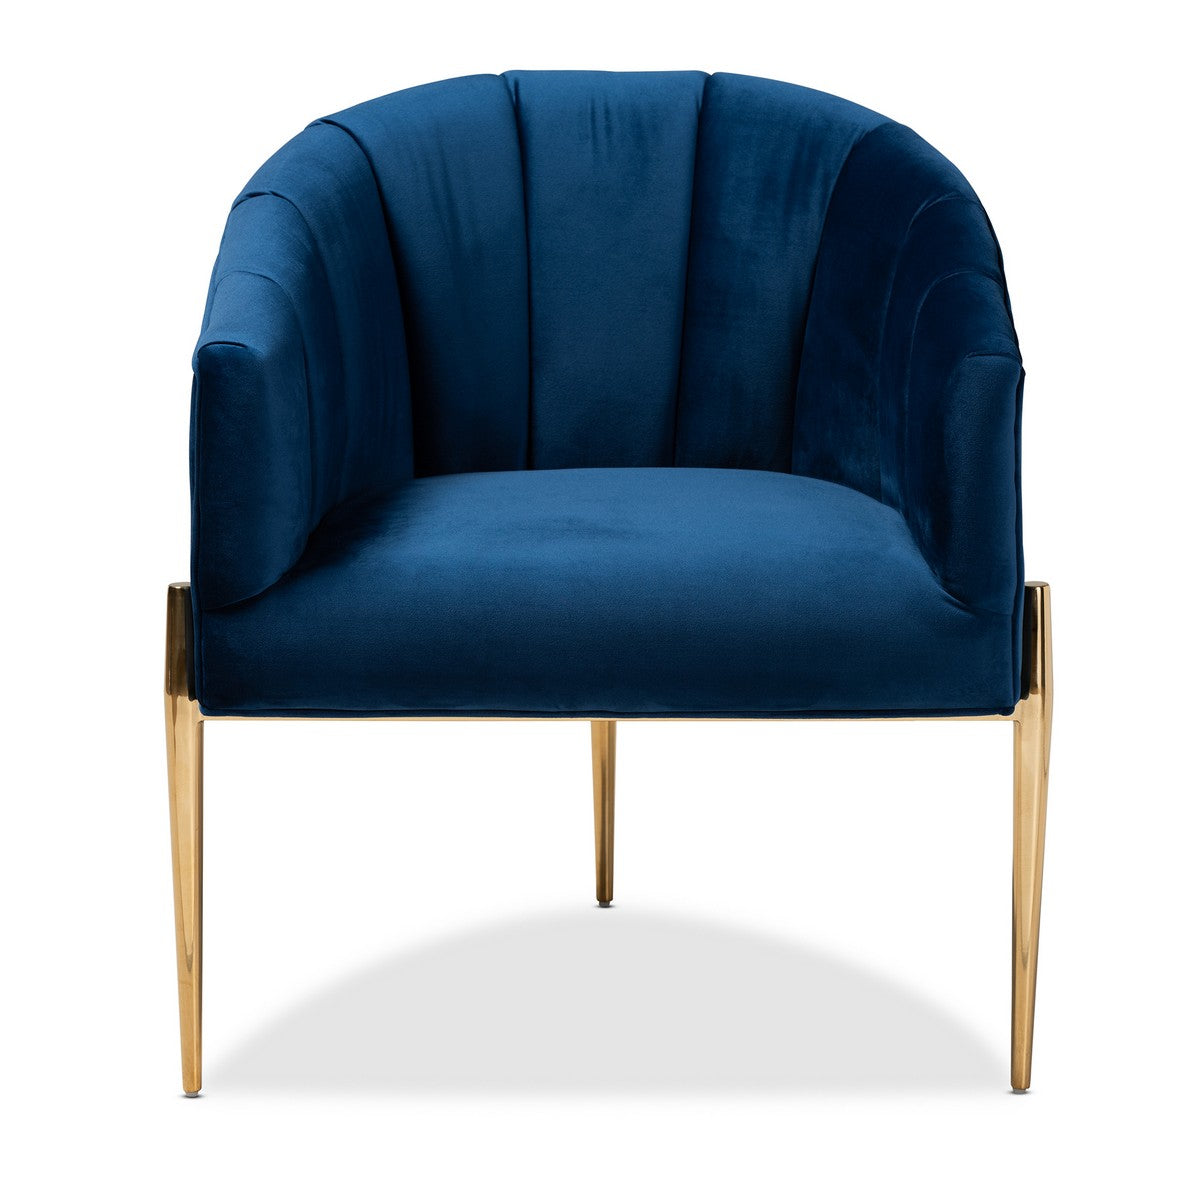 Baxton Studio Clarisse Glam and Luxe Navy Blue Velvet Fabric Upholstered Gold Finished Accent Chair Baxton Studio-chairs-Minimal And Modern - 1